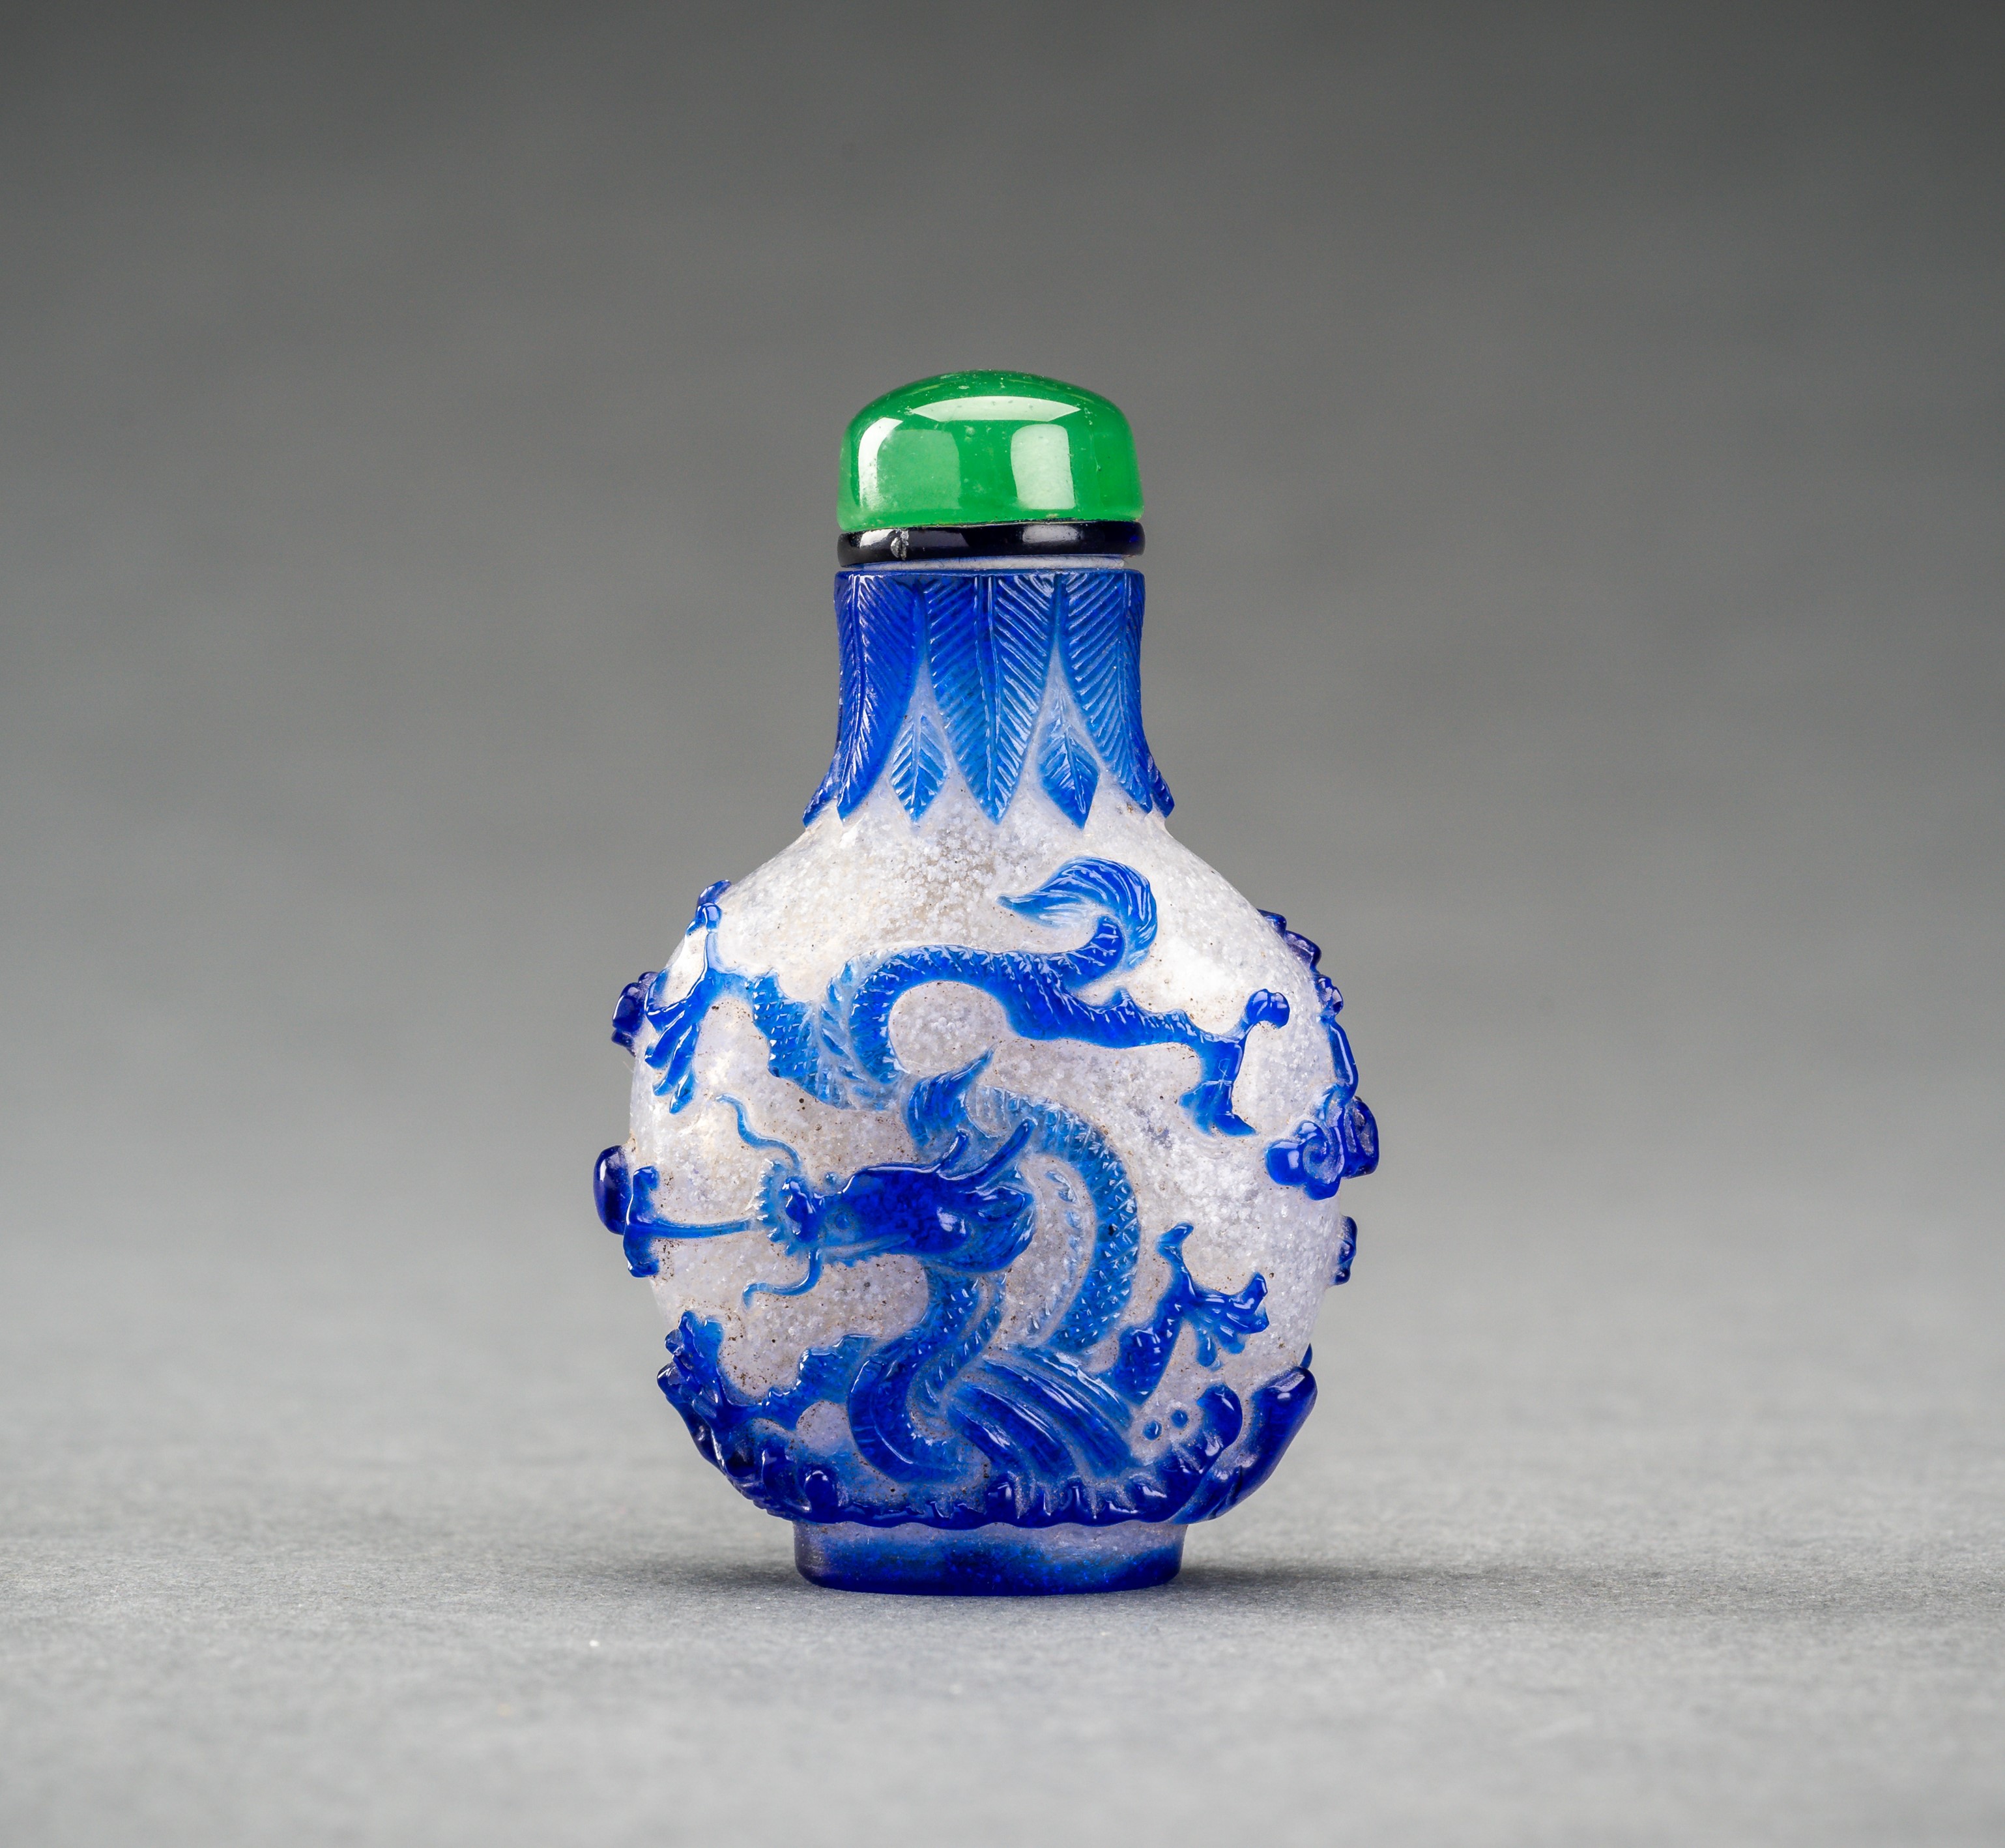 A BLUE OVERLAY 'SNOWFLAKE' GLASS SNUFF BOTTLE